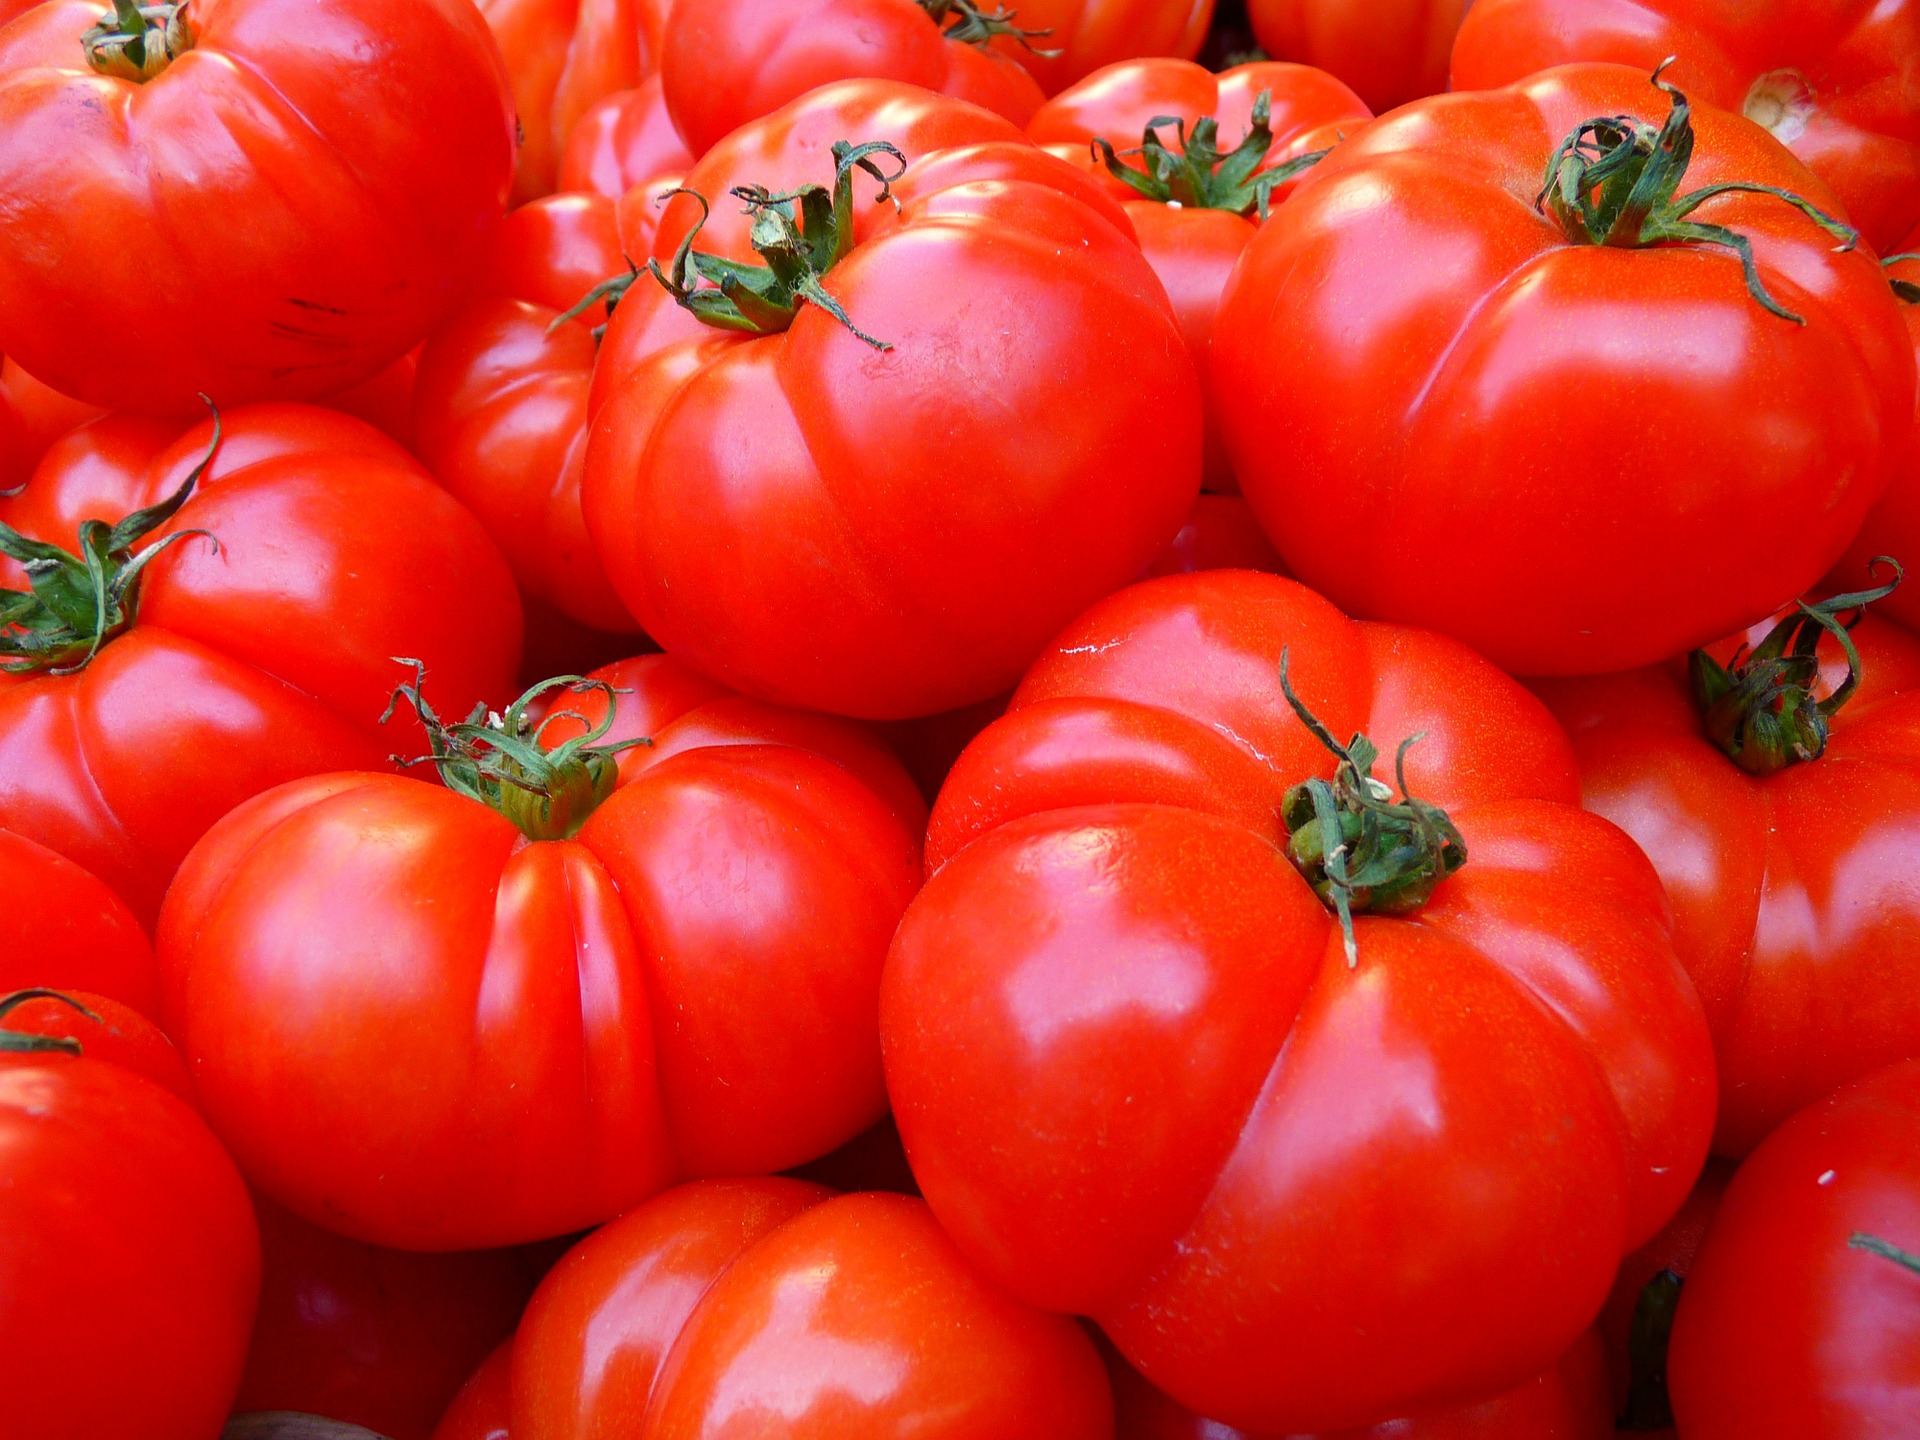 tomatoes gc7686ea86 1920 Study: Tomatoes Grown in Lead-Contaminated Soil Appear Safe to Eat